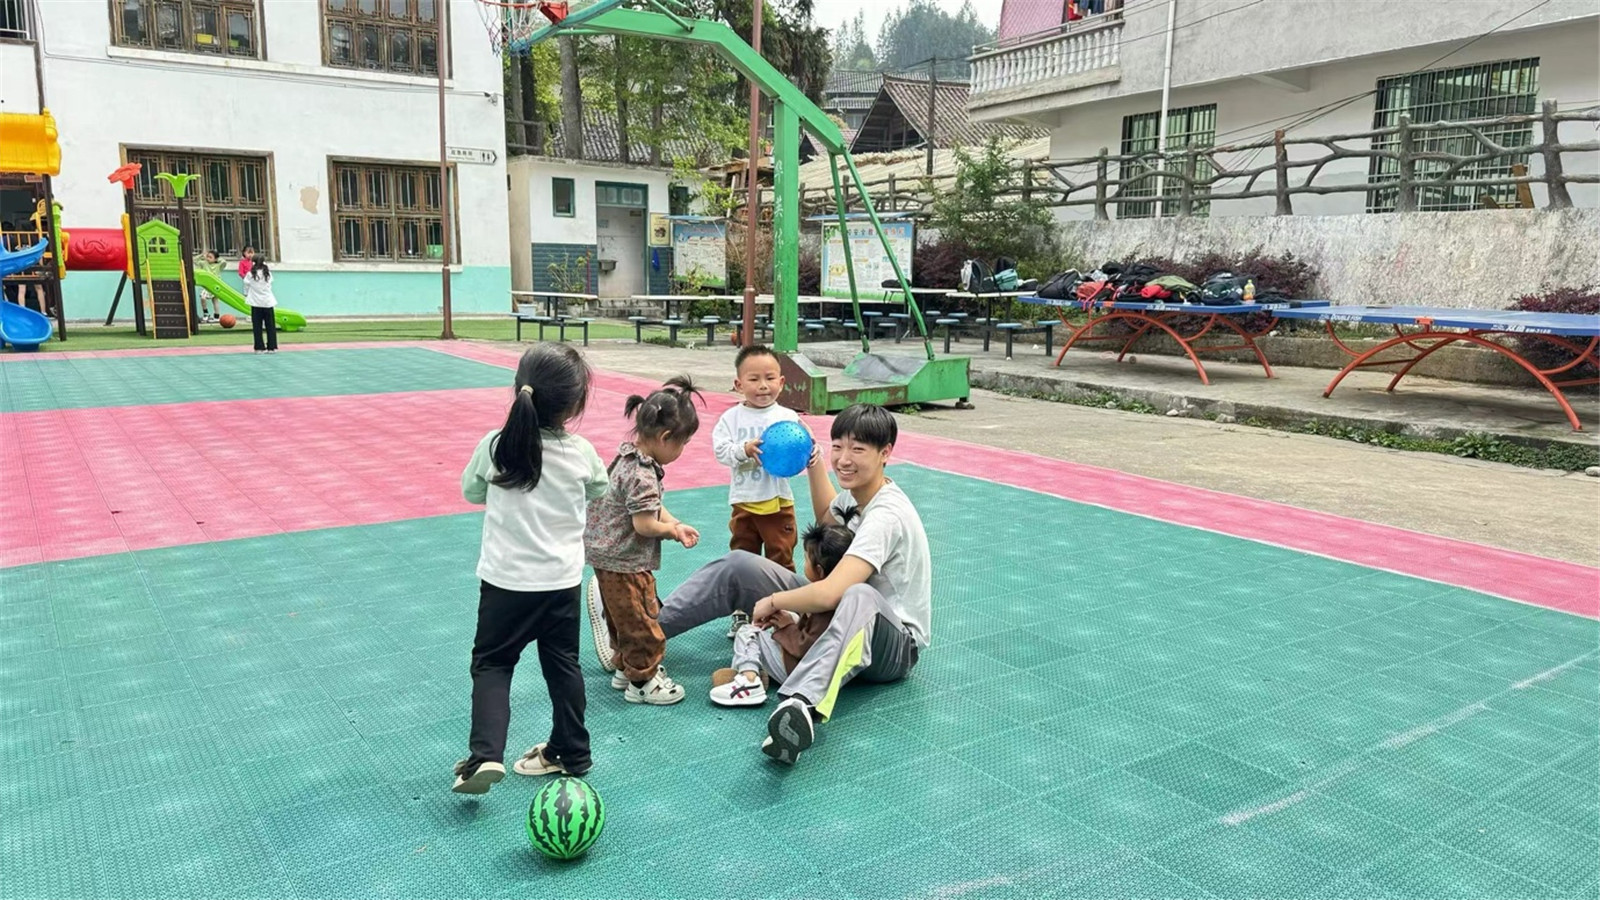 Playing with local kids in rural Guizhou